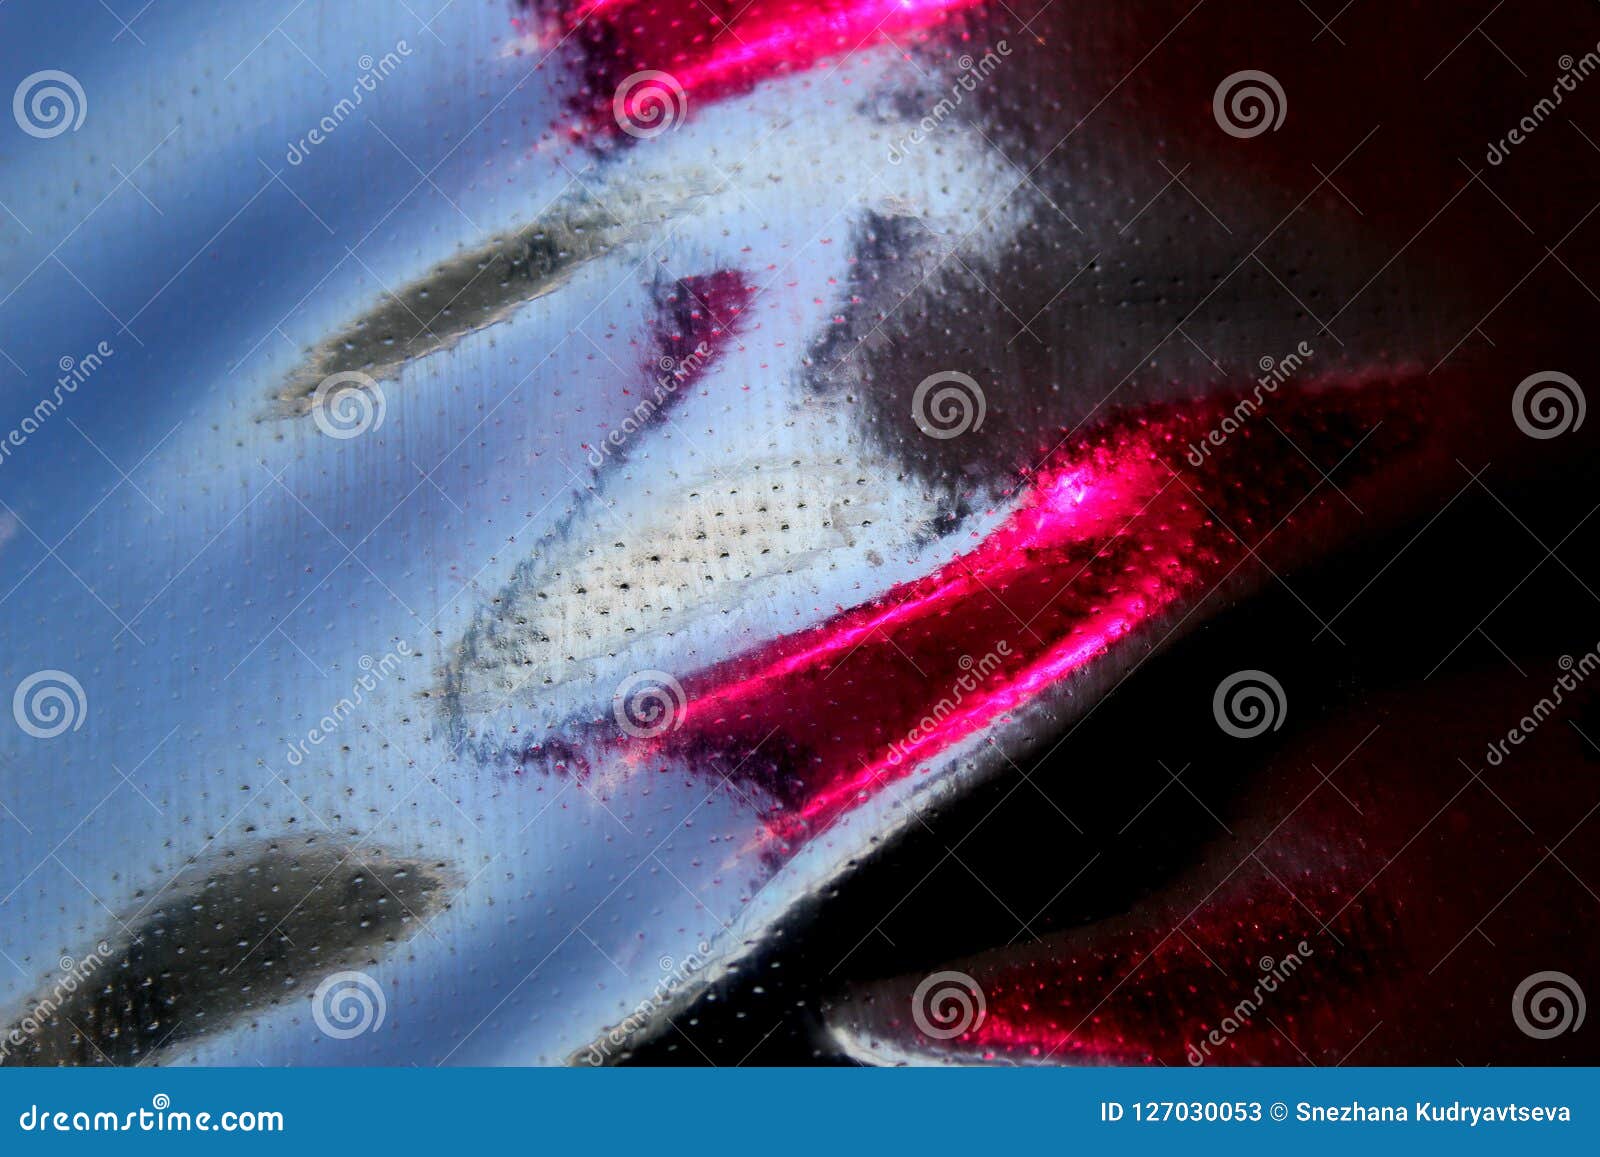 Rough black leather sheet, abstract pattern texture background